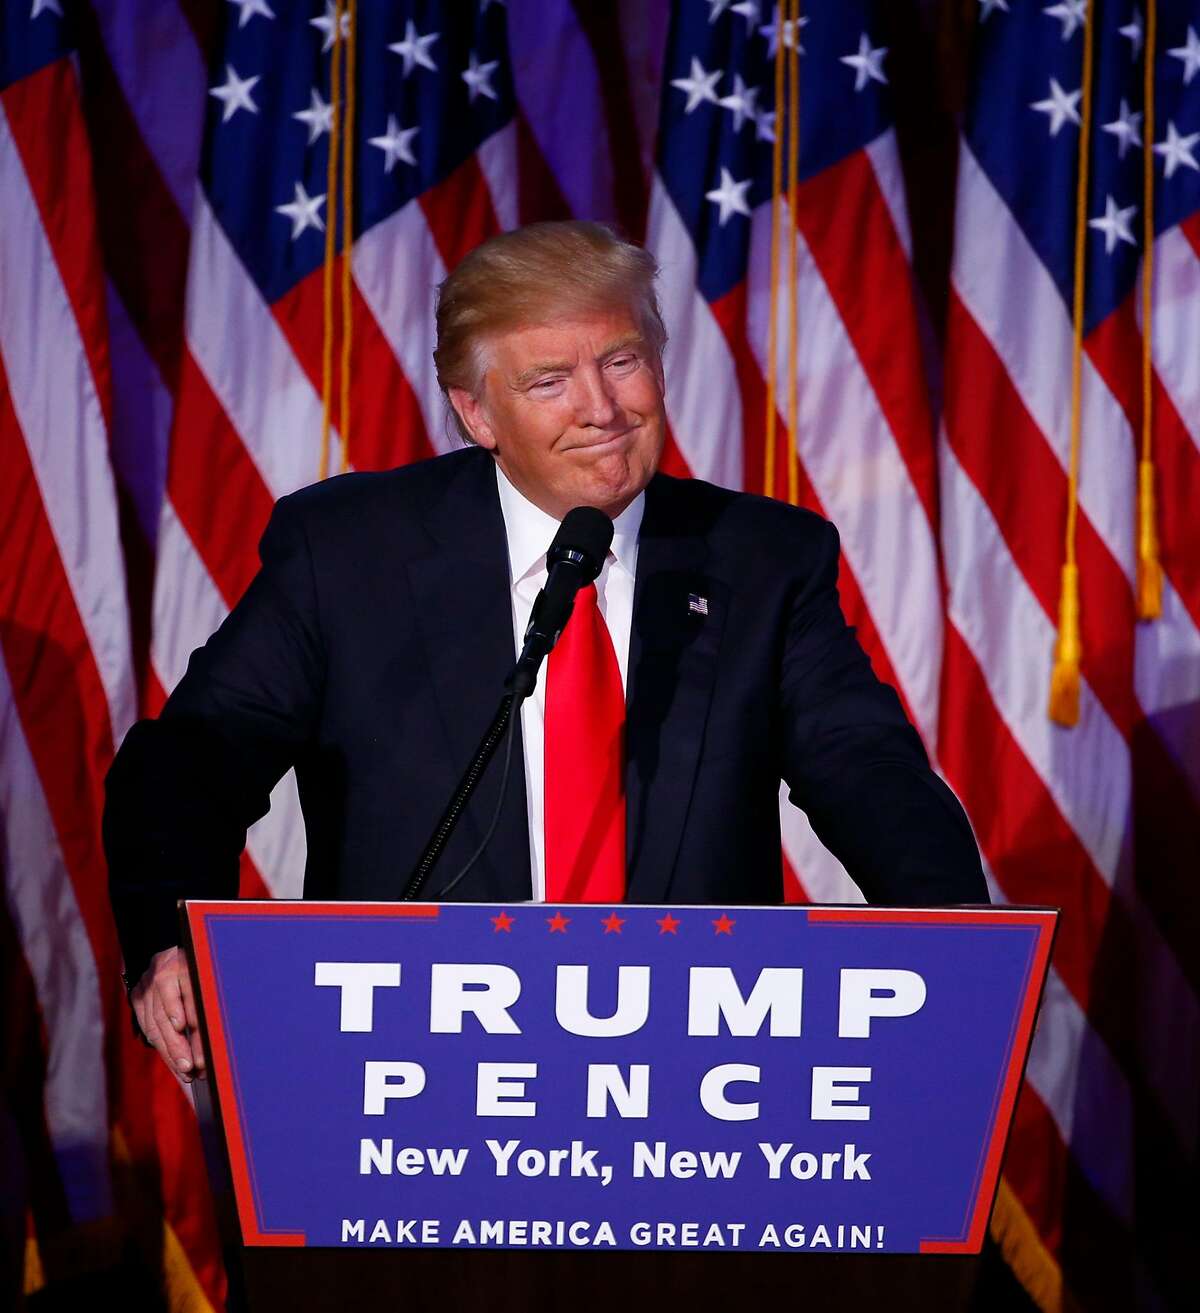 onald Trump addresses the country after winning the election, around 3 a.m. in New York, Nov. 9, 2016.